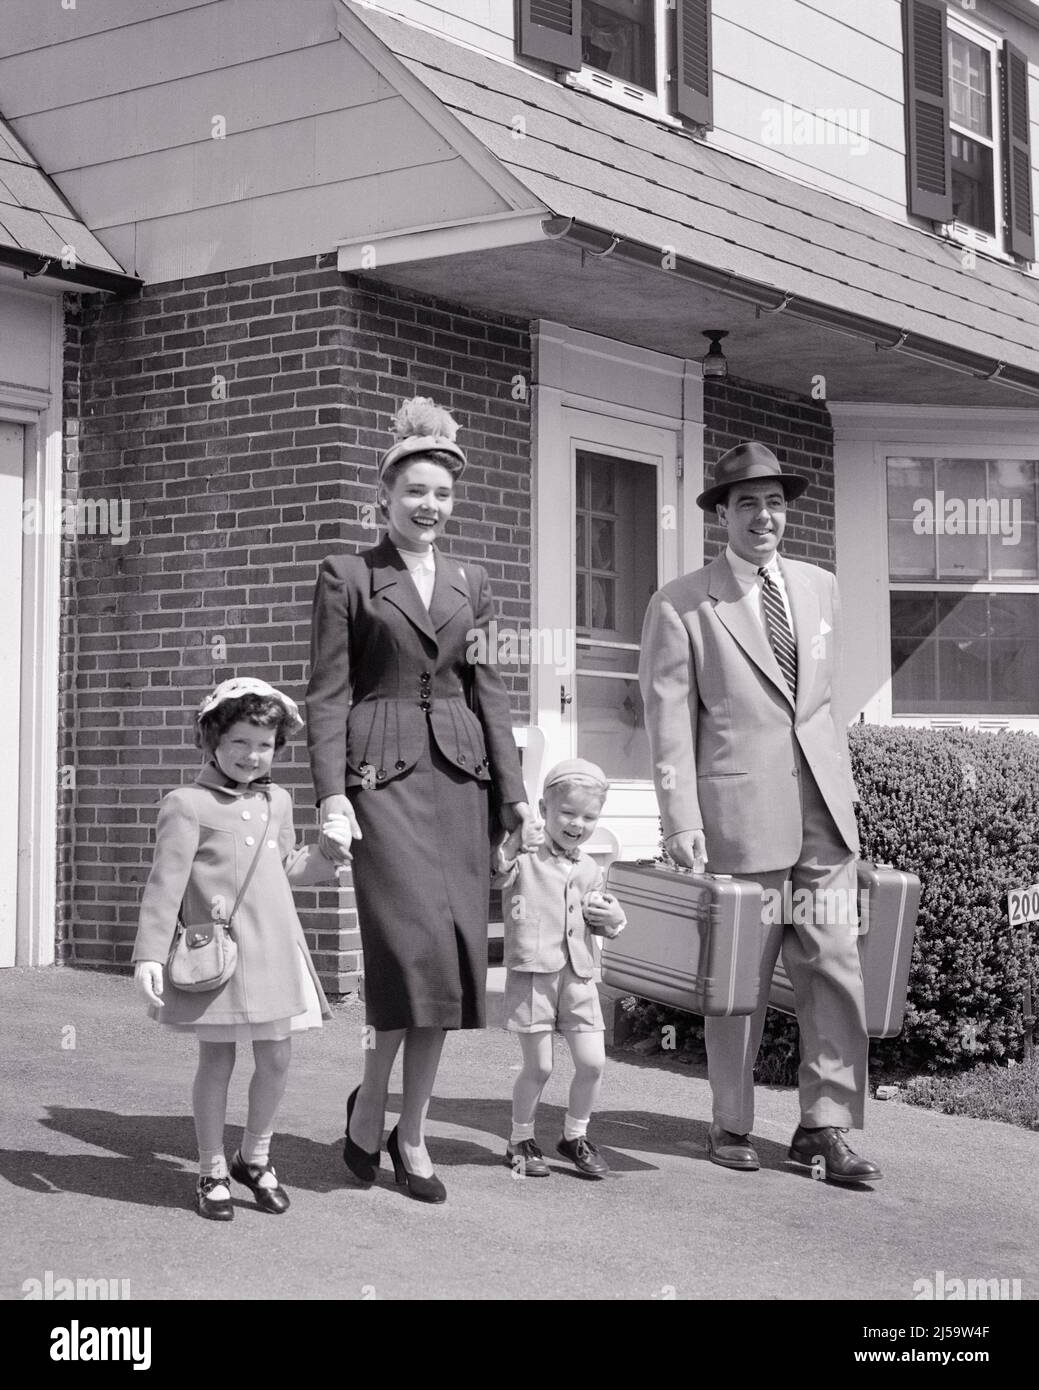 https://c8.alamy.com/comp/2J59W4F/1950s-family-of-four-walking-down-driveway-of-house-father-holding-luggage-mother-holding-hands-of-the-son-and-daughter-j1092-har001-hars-luggage-clothing-nostalgic-pair-4-community-suburban-mothers-old-time-nostalgia-brother-old-fashion-sister-driveway-juvenile-style-young-adult-fashionable-sons-joy-lifestyle-females-houses-married-brothers-spouse-husbands-healthiness-home-life-copy-space-friendship-full-length-ladies-daughters-persons-residential-males-buildings-siblings-sisters-fathers-bw-partner-suit-and-tie-happiness-dads-excitement-pride-homes-sibling-connection-residence-stylish-2J59W4F.jpg